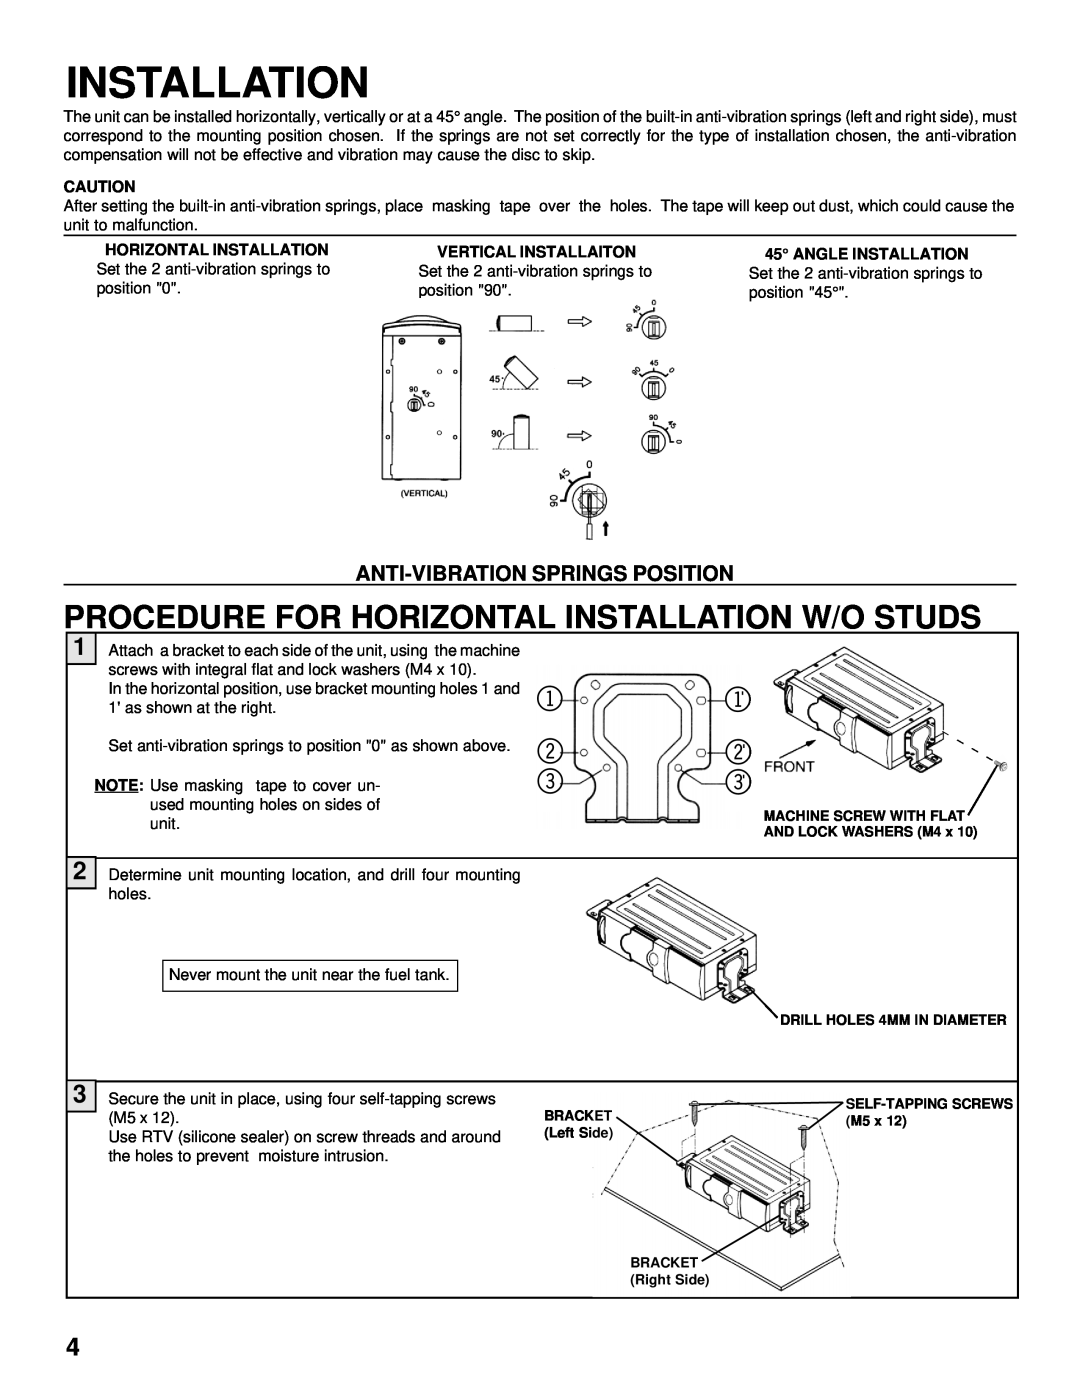 Audiovox SP-11CD installation manual Procedure For Horizontal Installation W/O Studs, Anti-Vibrationsprings Position 